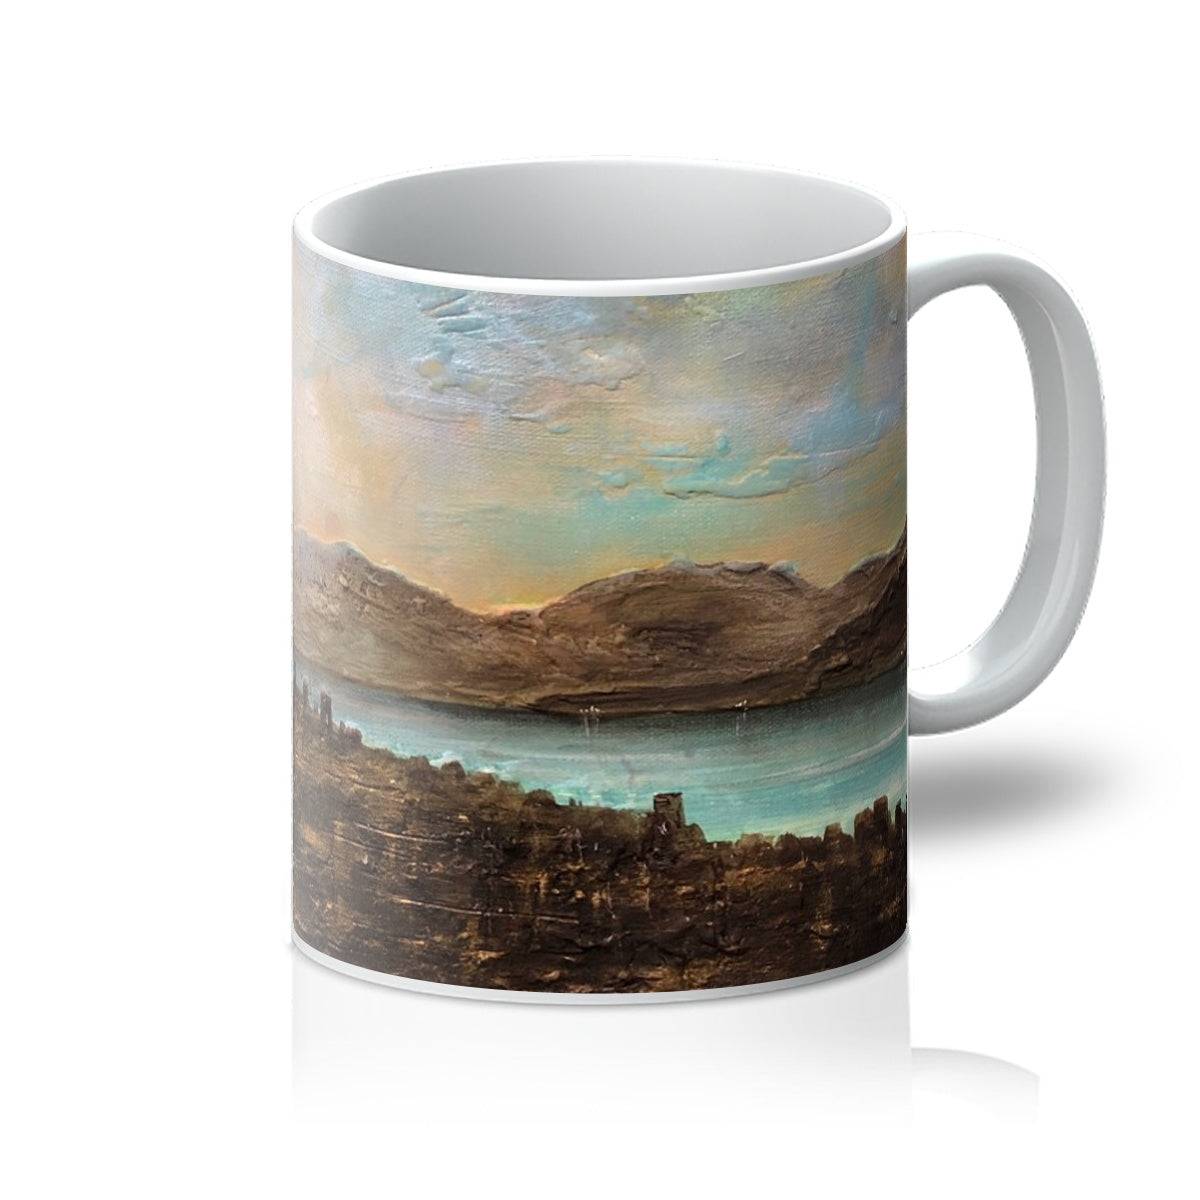 Angels Fingers Over Greenock Art Gifts Mug-Mugs-River Clyde Art Gallery-11oz-White-Paintings, Prints, Homeware, Art Gifts From Scotland By Scottish Artist Kevin Hunter